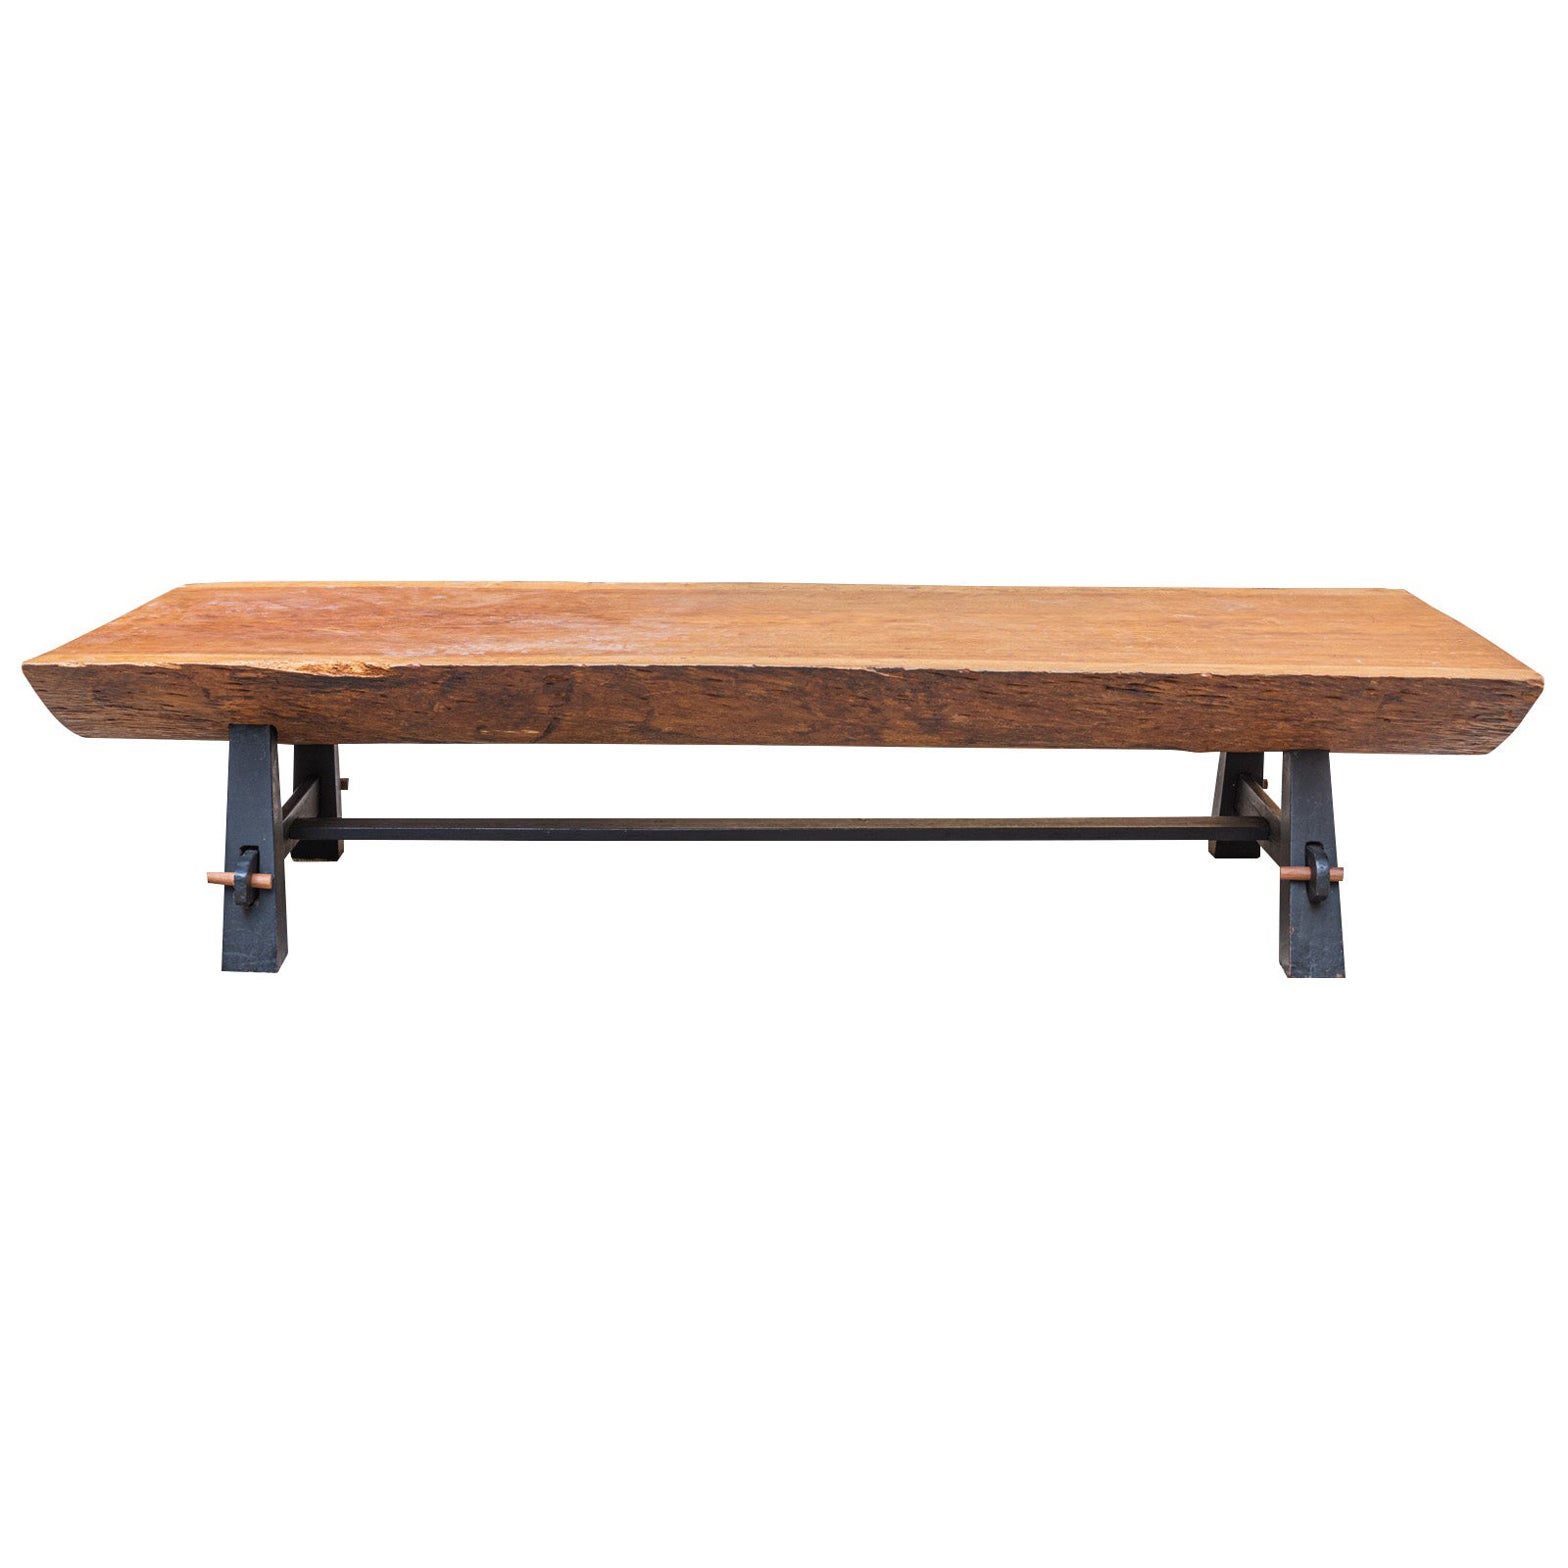 Jean Touret for the Marolles Workshop, Coffee Table, Wood, circa 1980, France